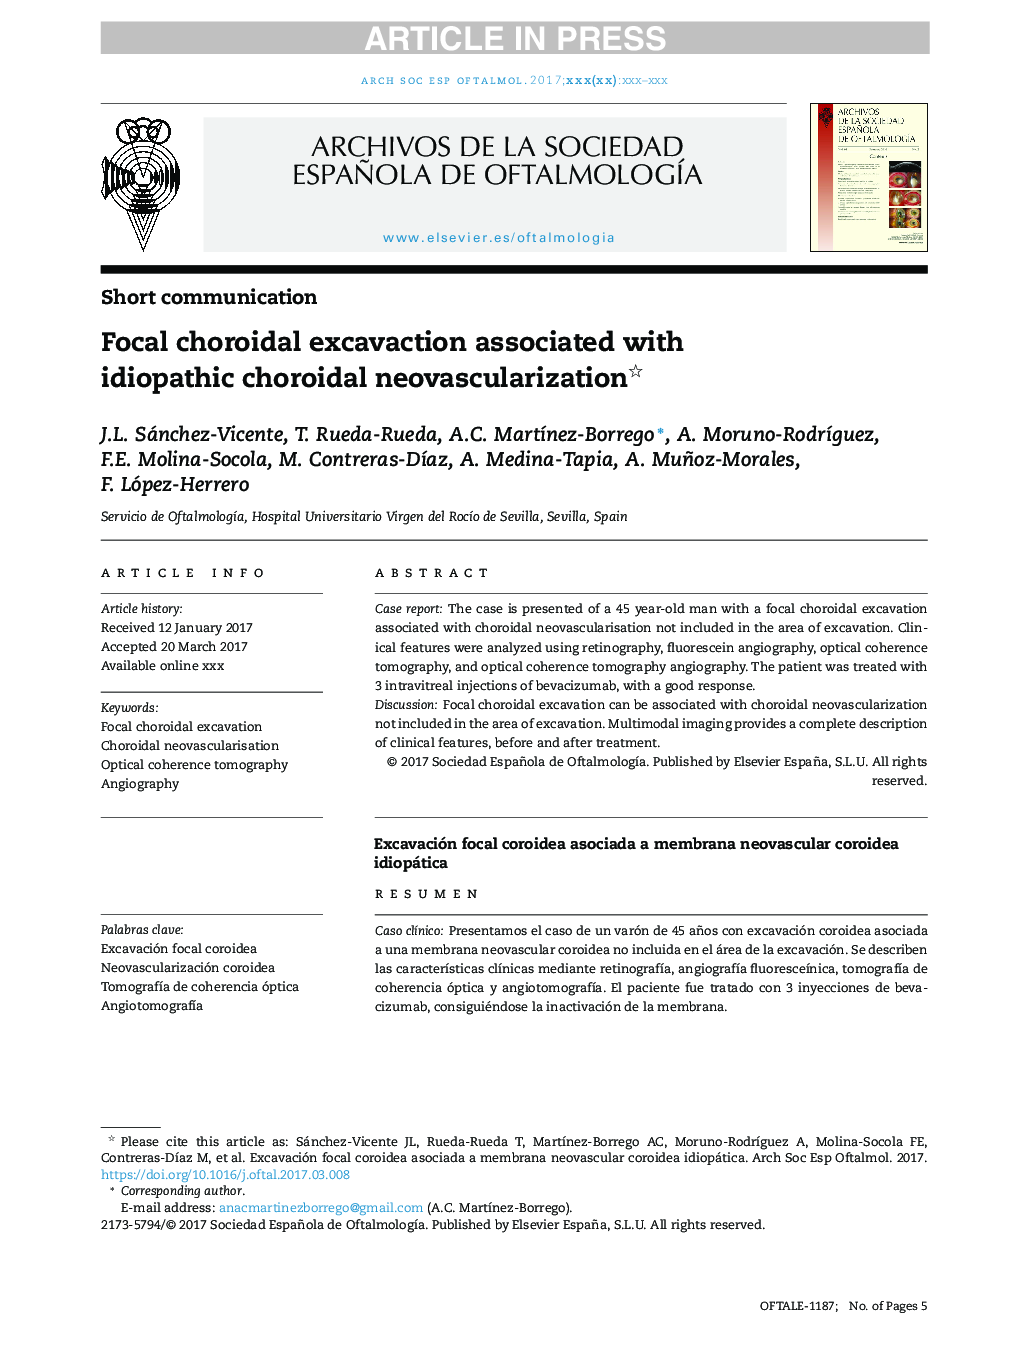 Focal choroidal excavaction associated with idiopathic choroidal neovascularization